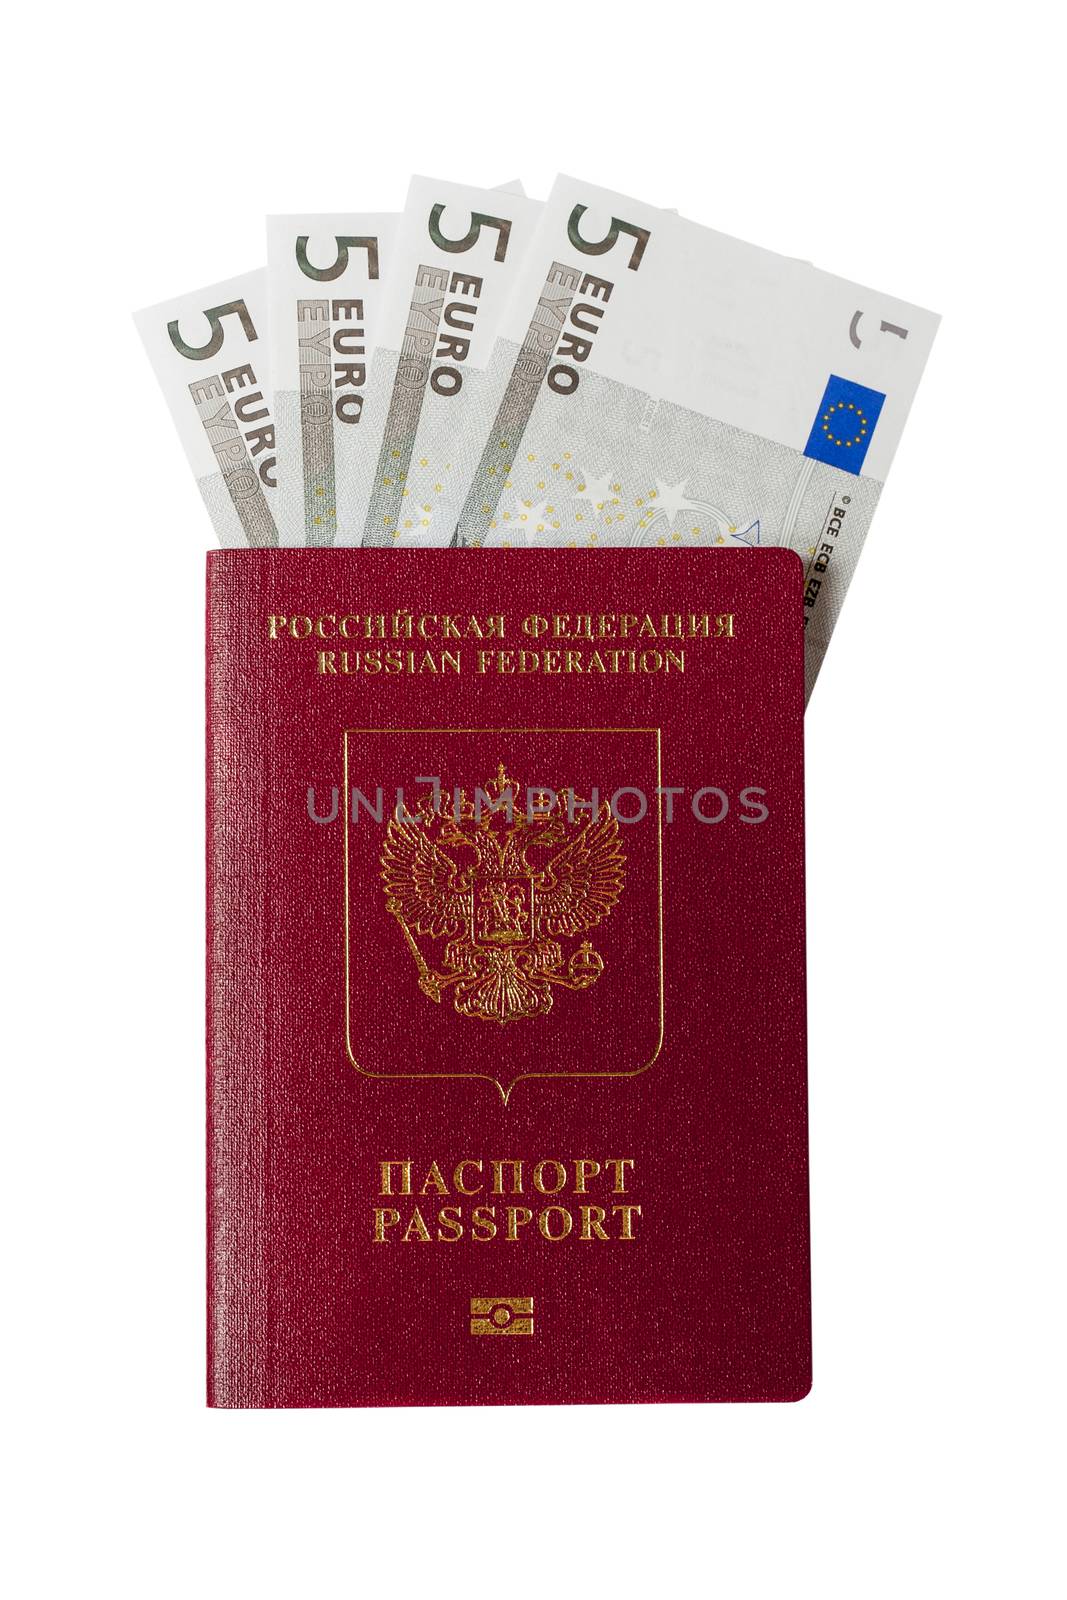 Russian passport and banknotes for five euros on a white background